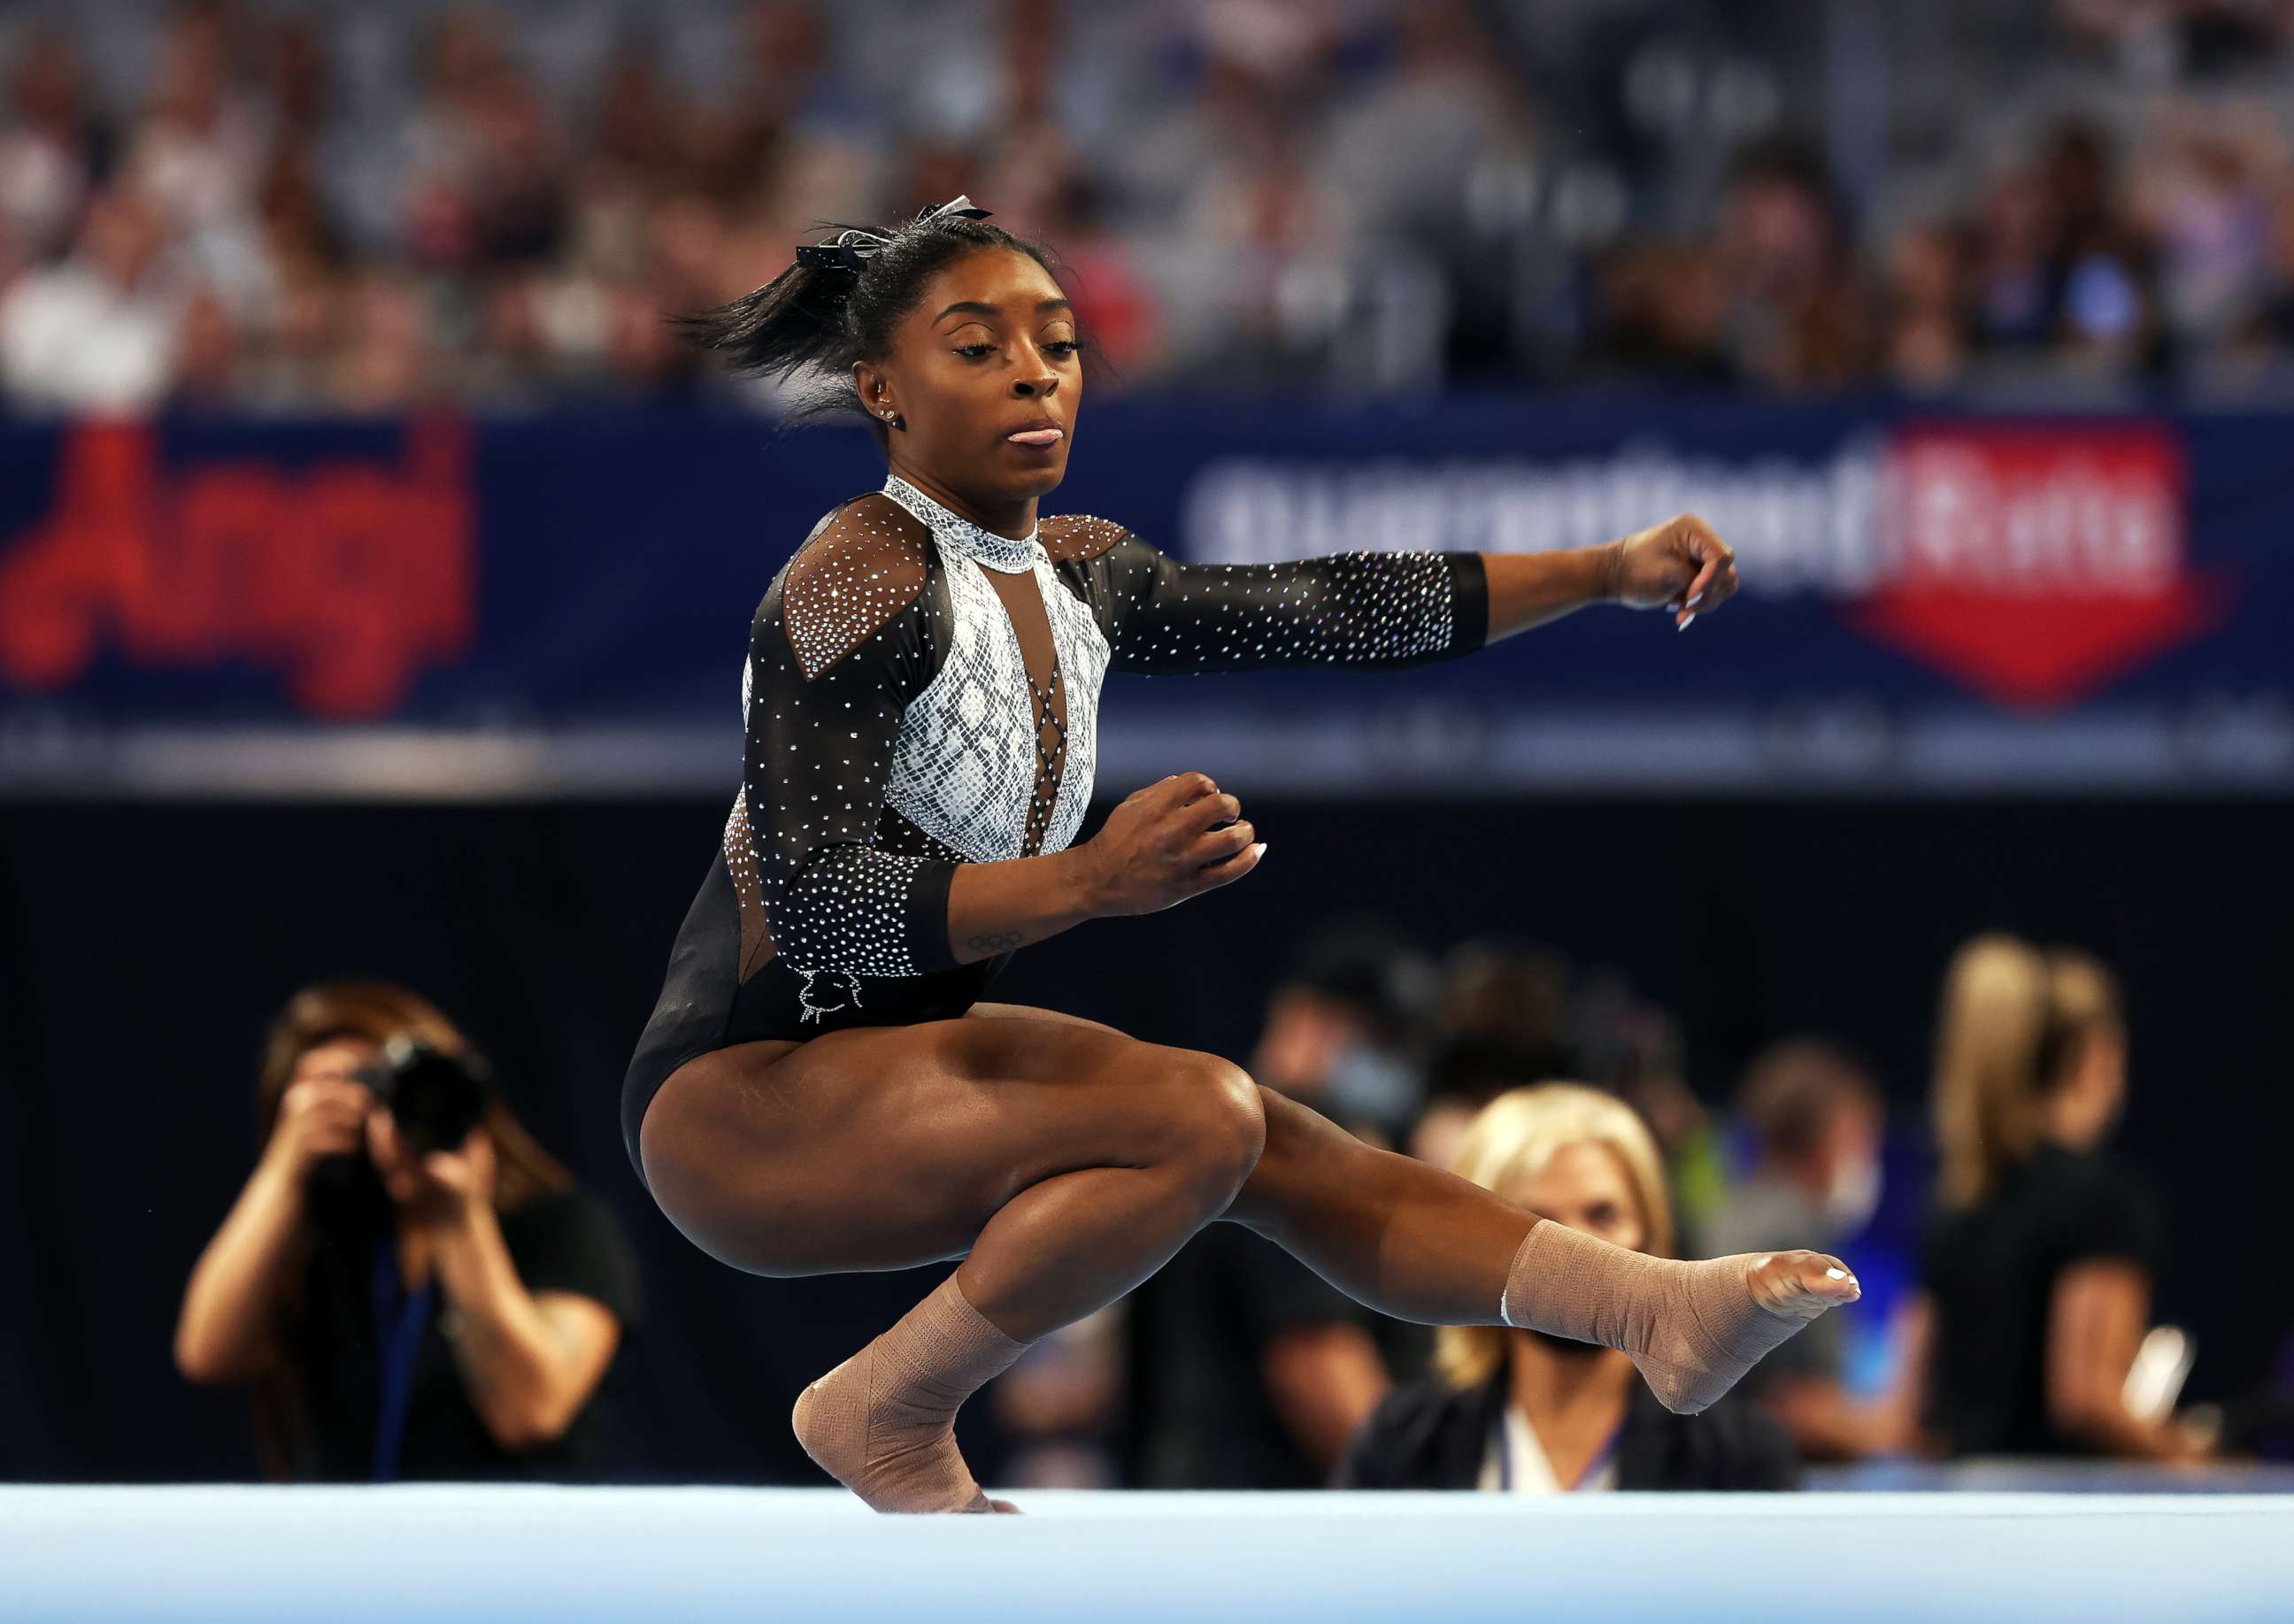 PHOTO: Simone Biles competes in the floor exercise during the Senior Women's competition of the U.S. Gymnastics Championships at Dickies Arena, June 6, 2021, in Fort Worth, Texas.